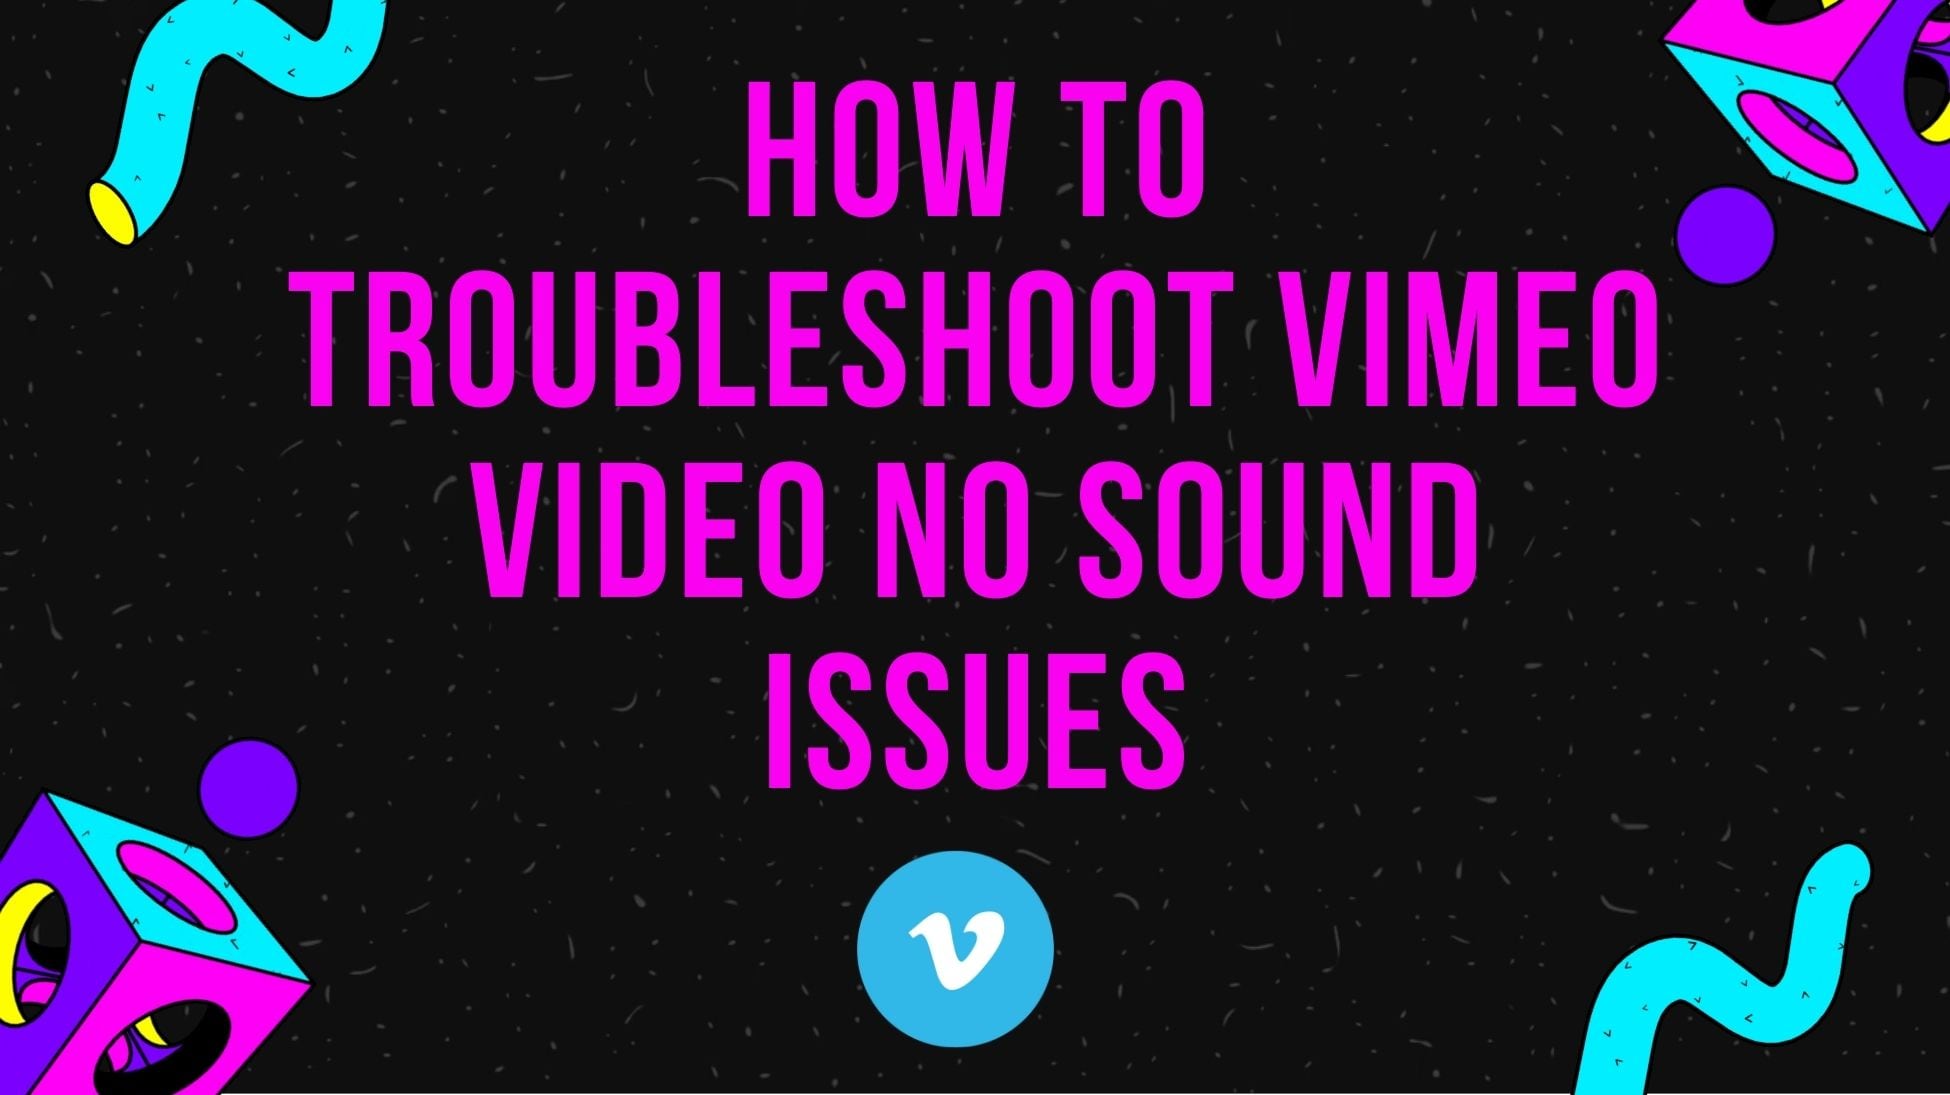 Vimeo No Sound? Here's a Step-by-step Troubleshooting Guide